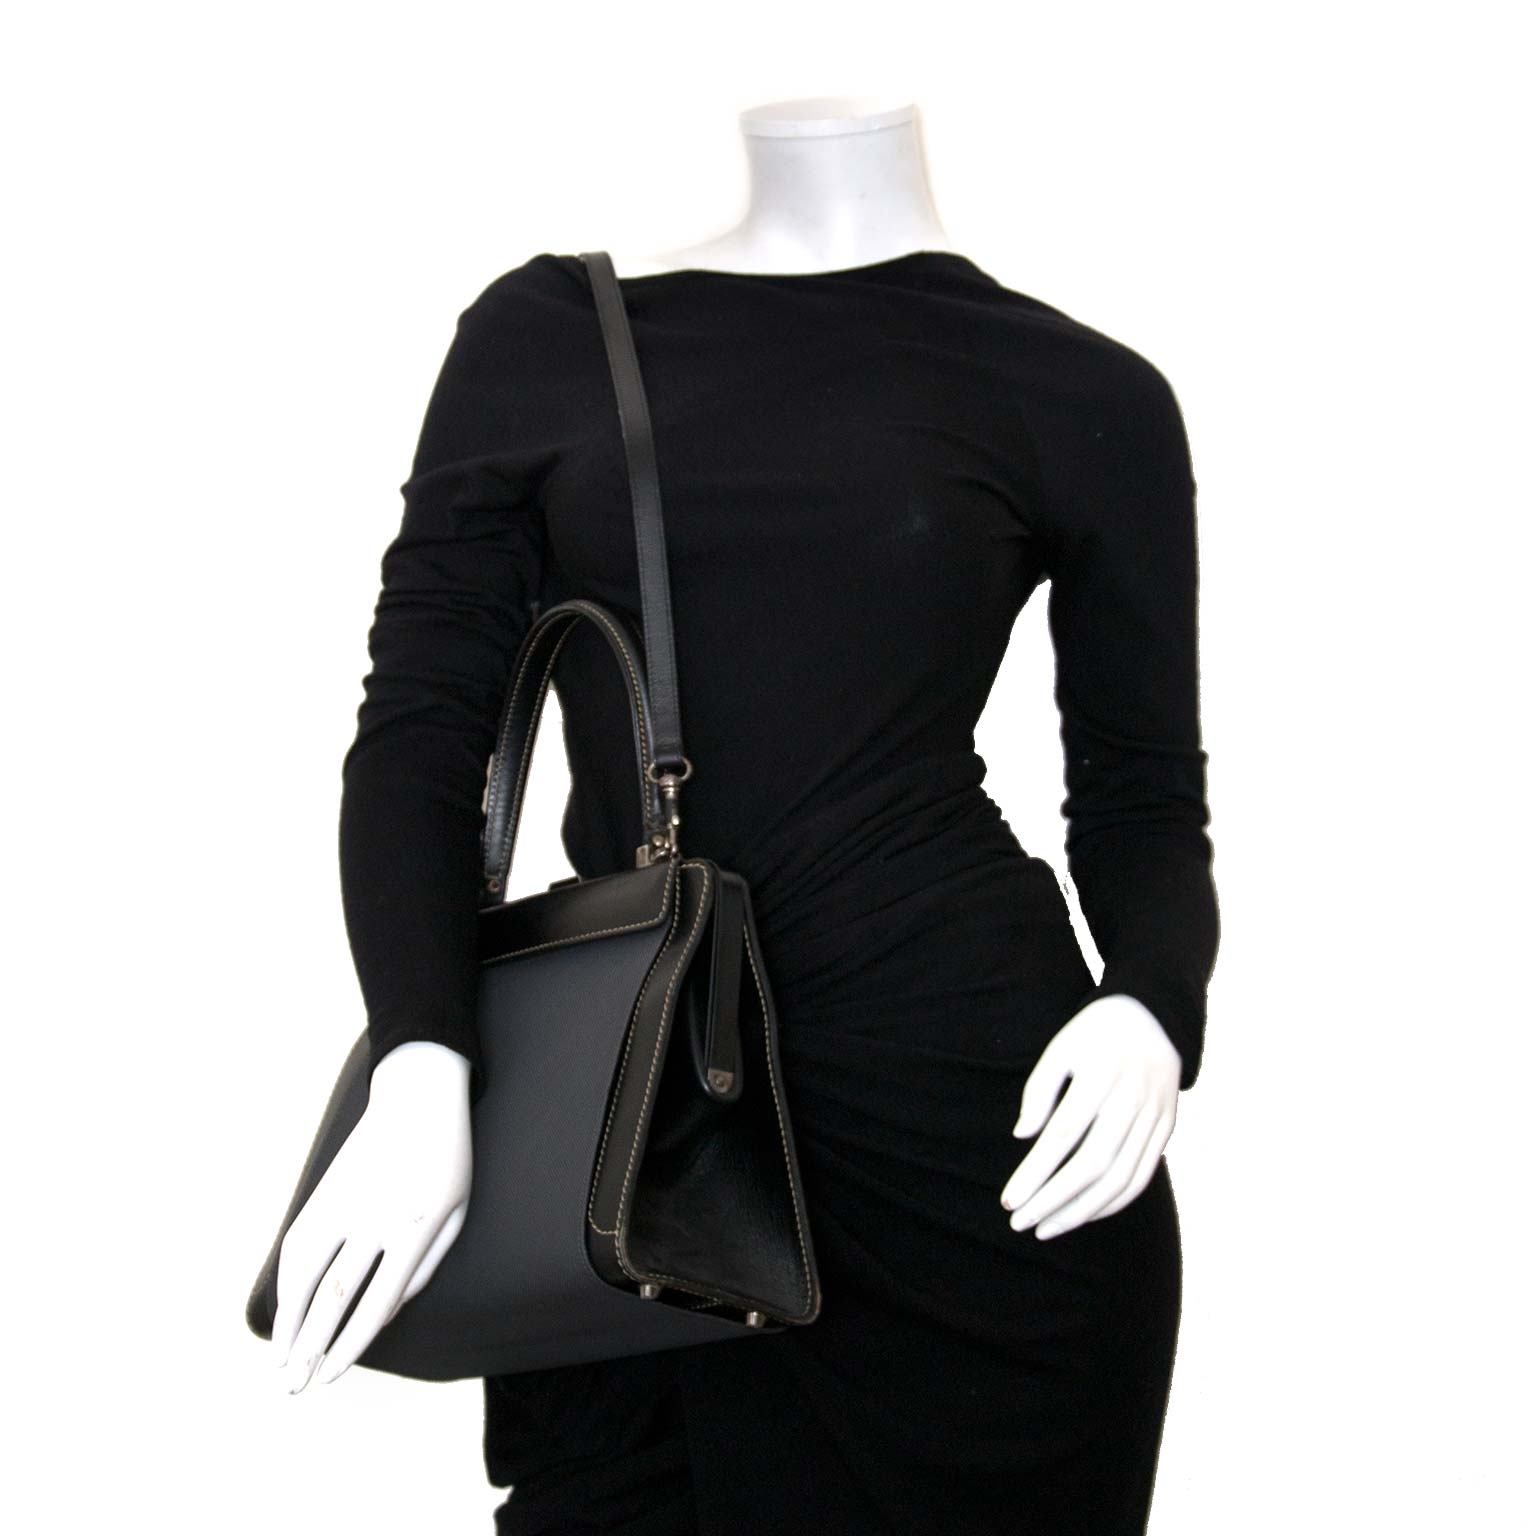 At Auction: Delvaux handbag 'Gué' in black leather